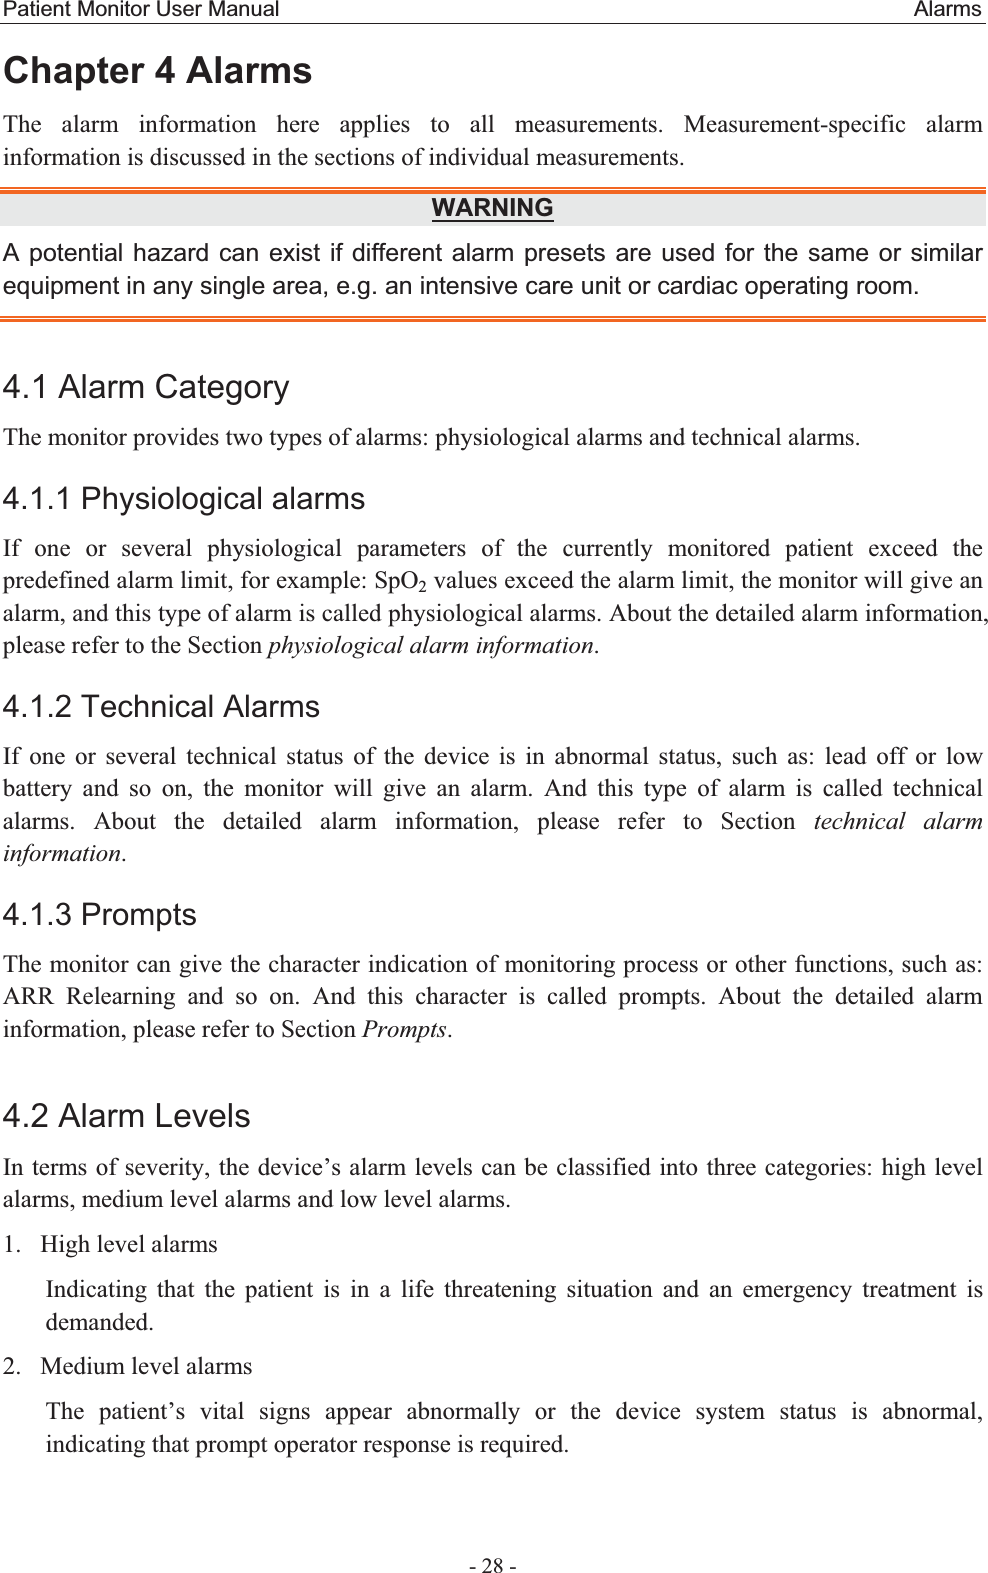 Patient Monitor User Manual                                                          Alarms  - 28 - Chapter 4 Alarms The alarm information here applies to all measurements. Measurement-specific alarm information is discussed in the sections of individual measurements. WARNINGA potential hazard can exist if different alarm presets are used for the same or similar equipment in any single area, e.g. an intensive care unit or cardiac operating room. 4.1 Alarm Category The monitor provides two types of alarms: physiological alarms and technical alarms. 4.1.1 Physiological alarms If one or several physiological parameters of the currently monitored patient exceed the predefined alarm limit, for example: SpO2 values exceed the alarm limit, the monitor will give an alarm, and this type of alarm is called physiological alarms. About the detailed alarm information, please refer to the Section physiological alarm information.  4.1.2 Technical Alarms If one or several technical status of the device is in abnormal status, such as: lead off or low battery and so on, the monitor will give an alarm. And this type of alarm is called technical alarms. About the detailed alarm information, please refer to Section technical alarm information.  4.1.3 Prompts The monitor can give the character indication of monitoring process or other functions, such as: ARR Relearning and so on. And this character is called prompts. About the detailed alarm information, please refer to Section Prompts. 4.2 Alarm Levels In terms of severity, the device’s alarm levels can be classified into three categories: high level alarms, medium level alarms and low level alarms. 1. High level alarms Indicating that the patient is in a life threatening situation and an emergency treatment is demanded. 2. Medium level alarms The patient’s vital signs appear abnormally or the device system status is abnormal, indicating that prompt operator response is required. 